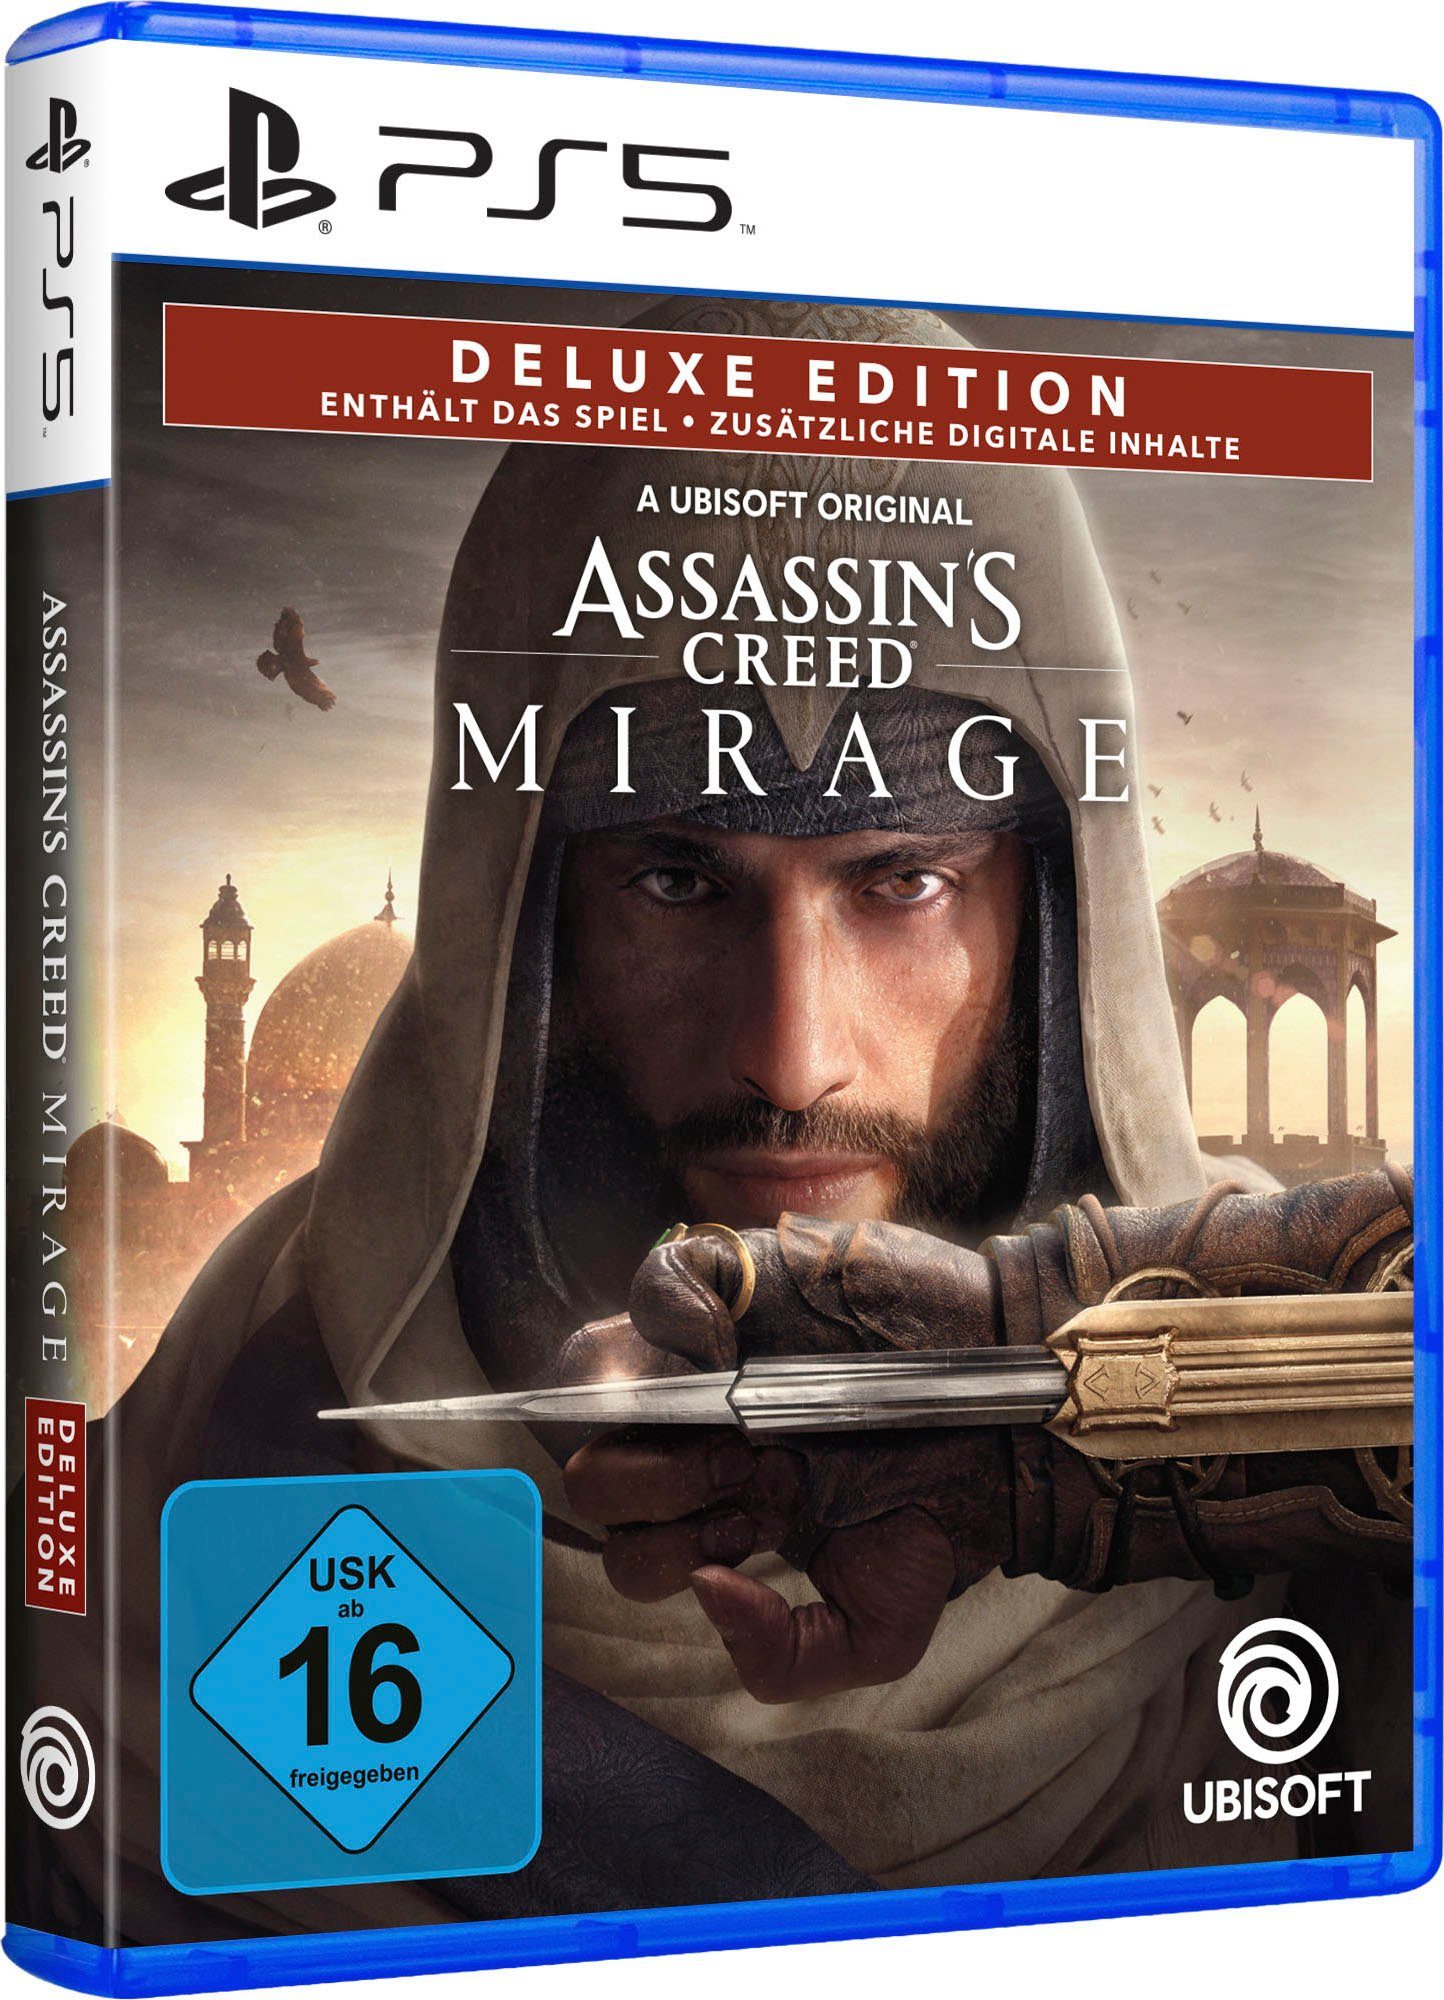 Assassin's PlayStation Creed Deluxe Edition UBISOFT Mirage 5 -